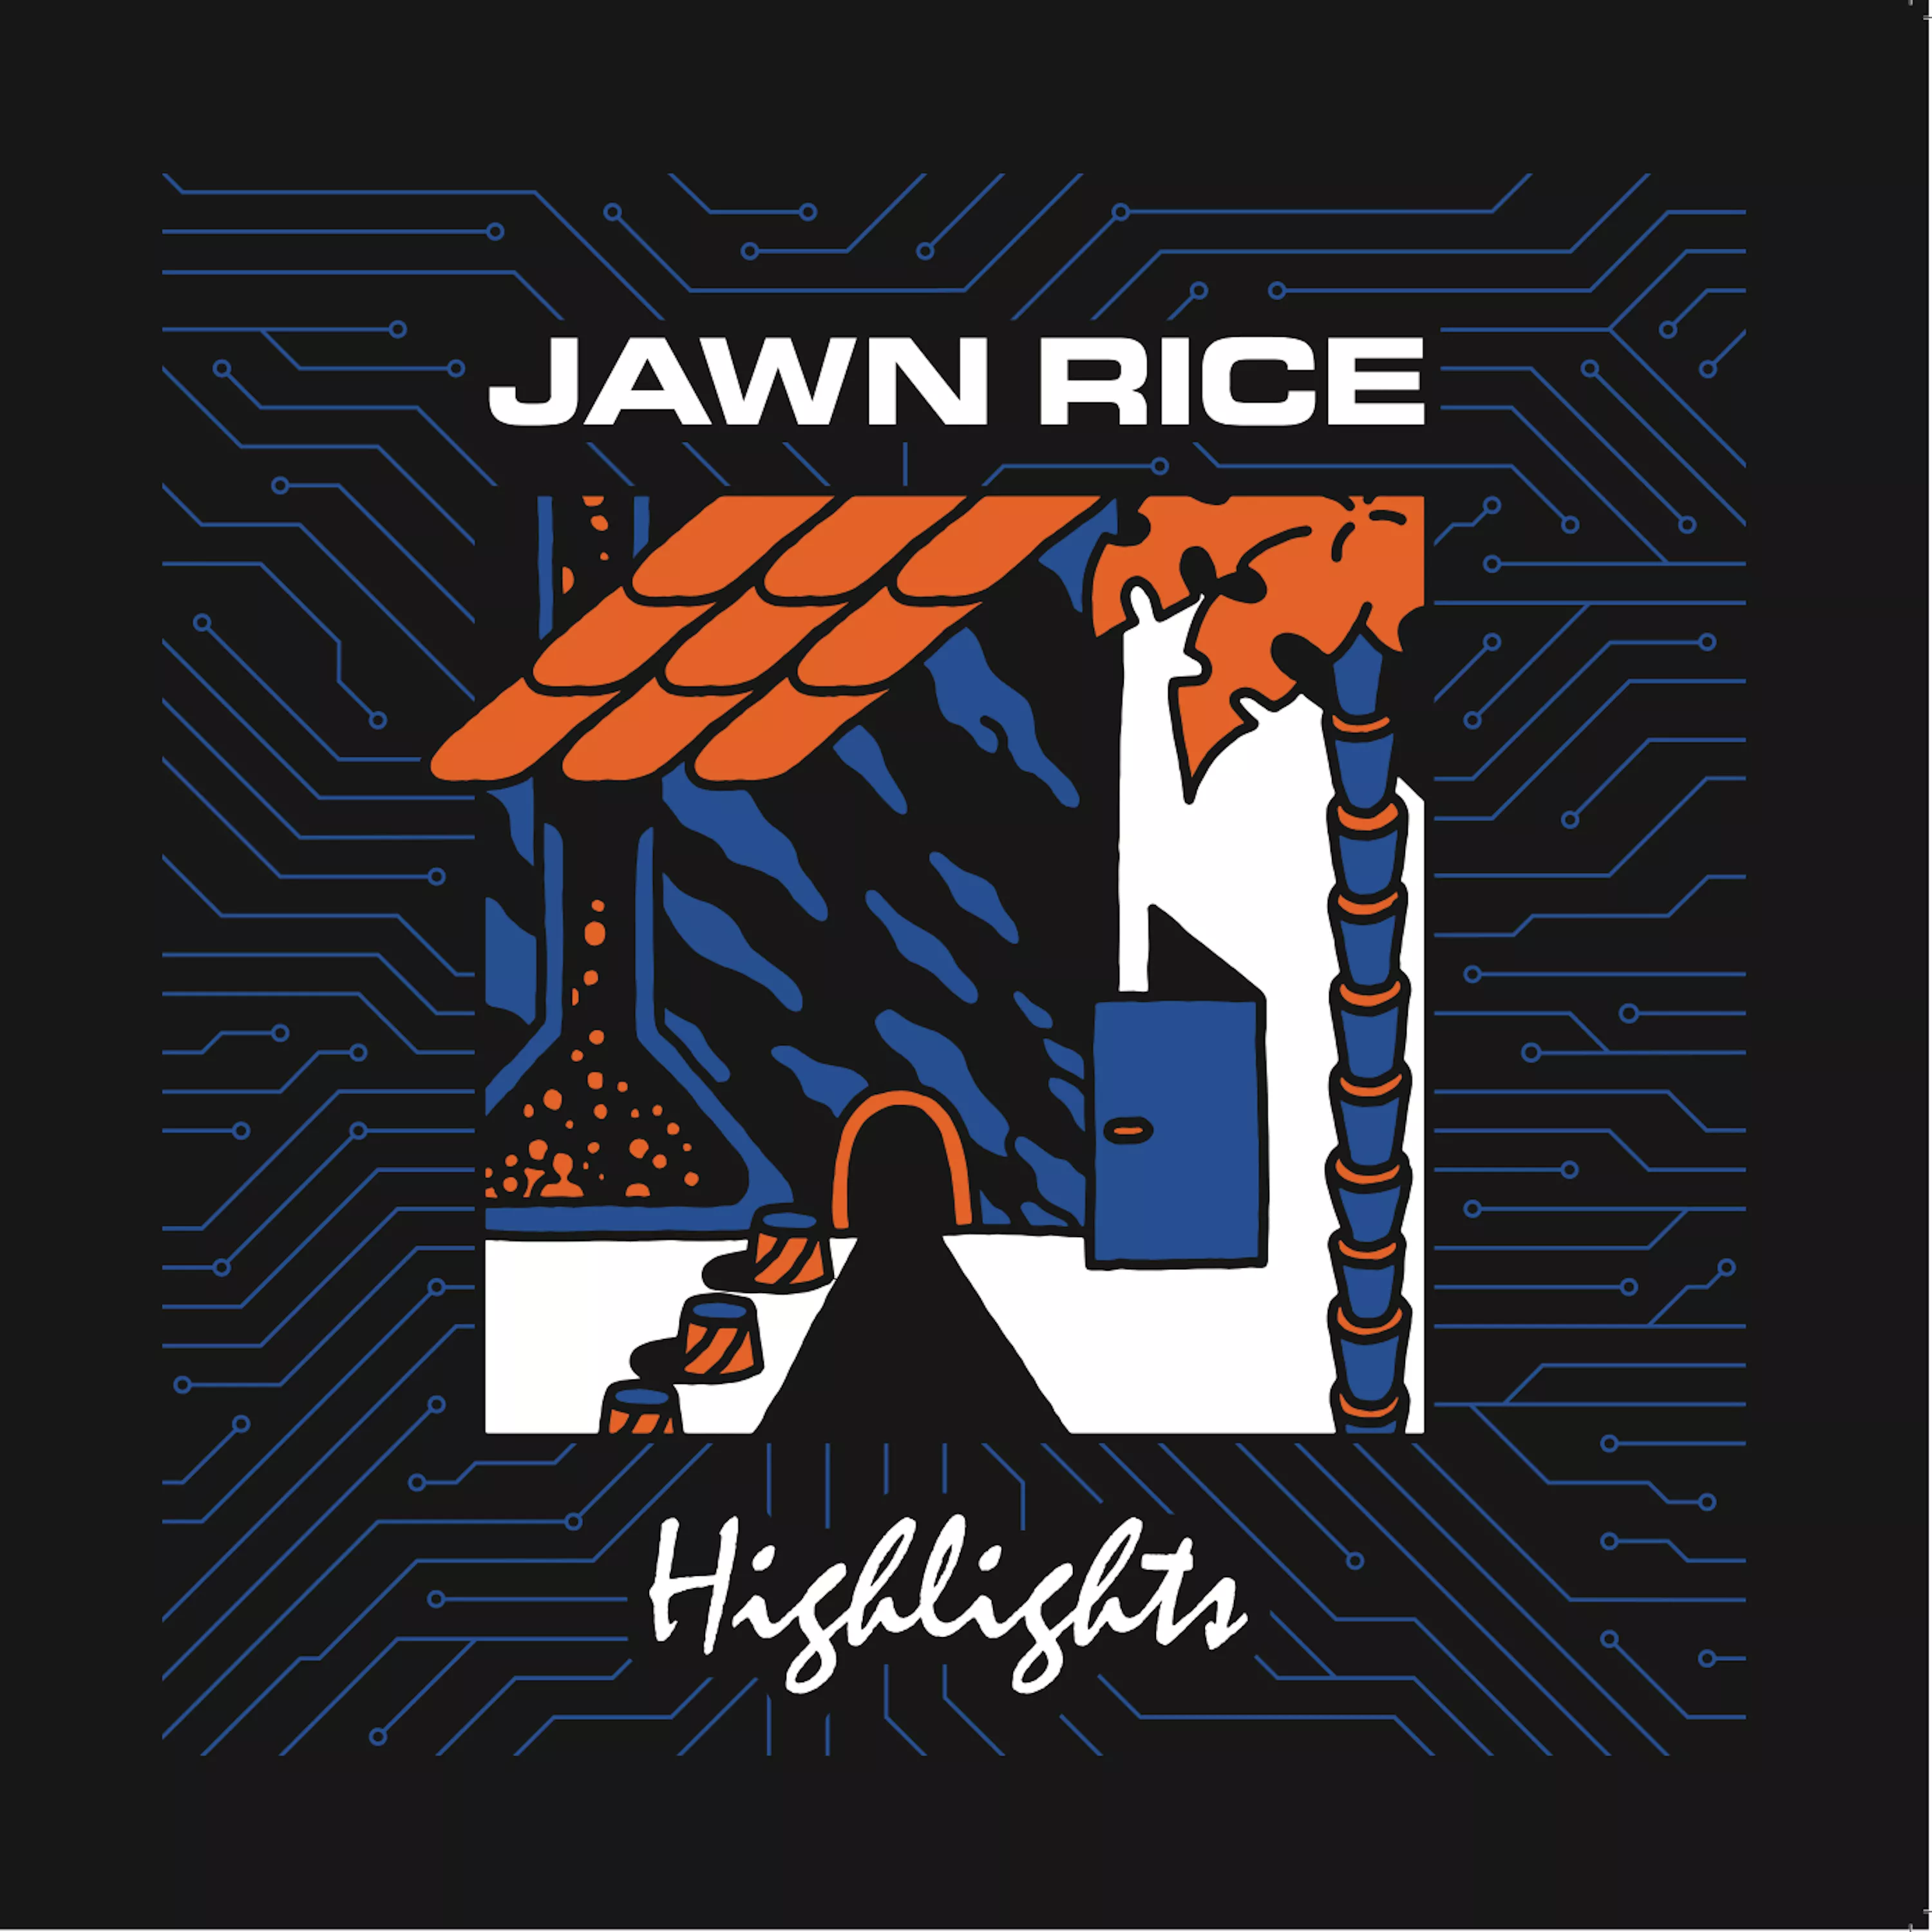 Highlights - Jawn Rice